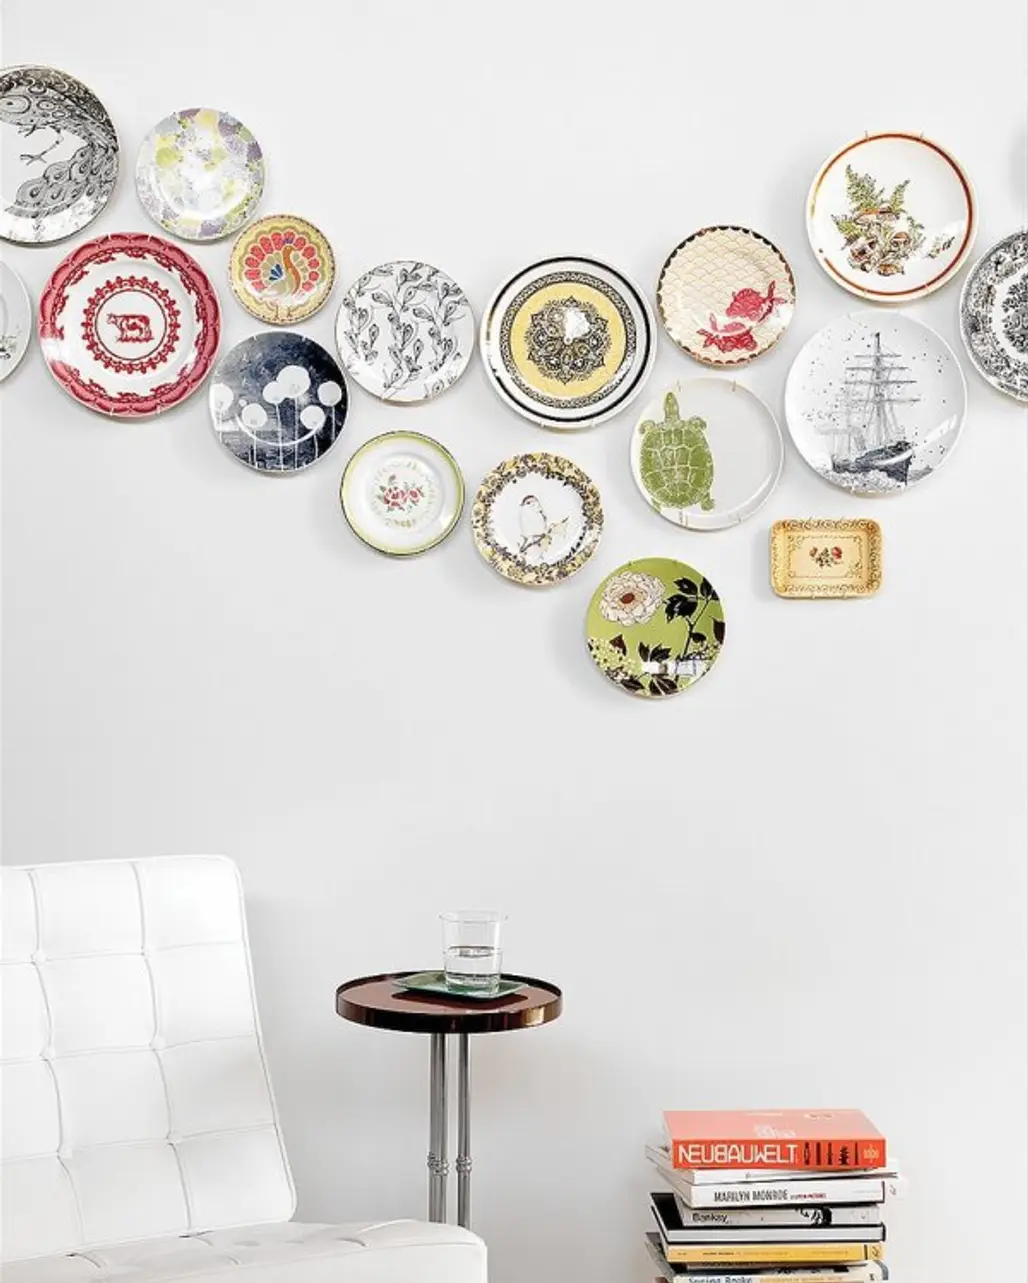 Display Decorative Plates on the Wall